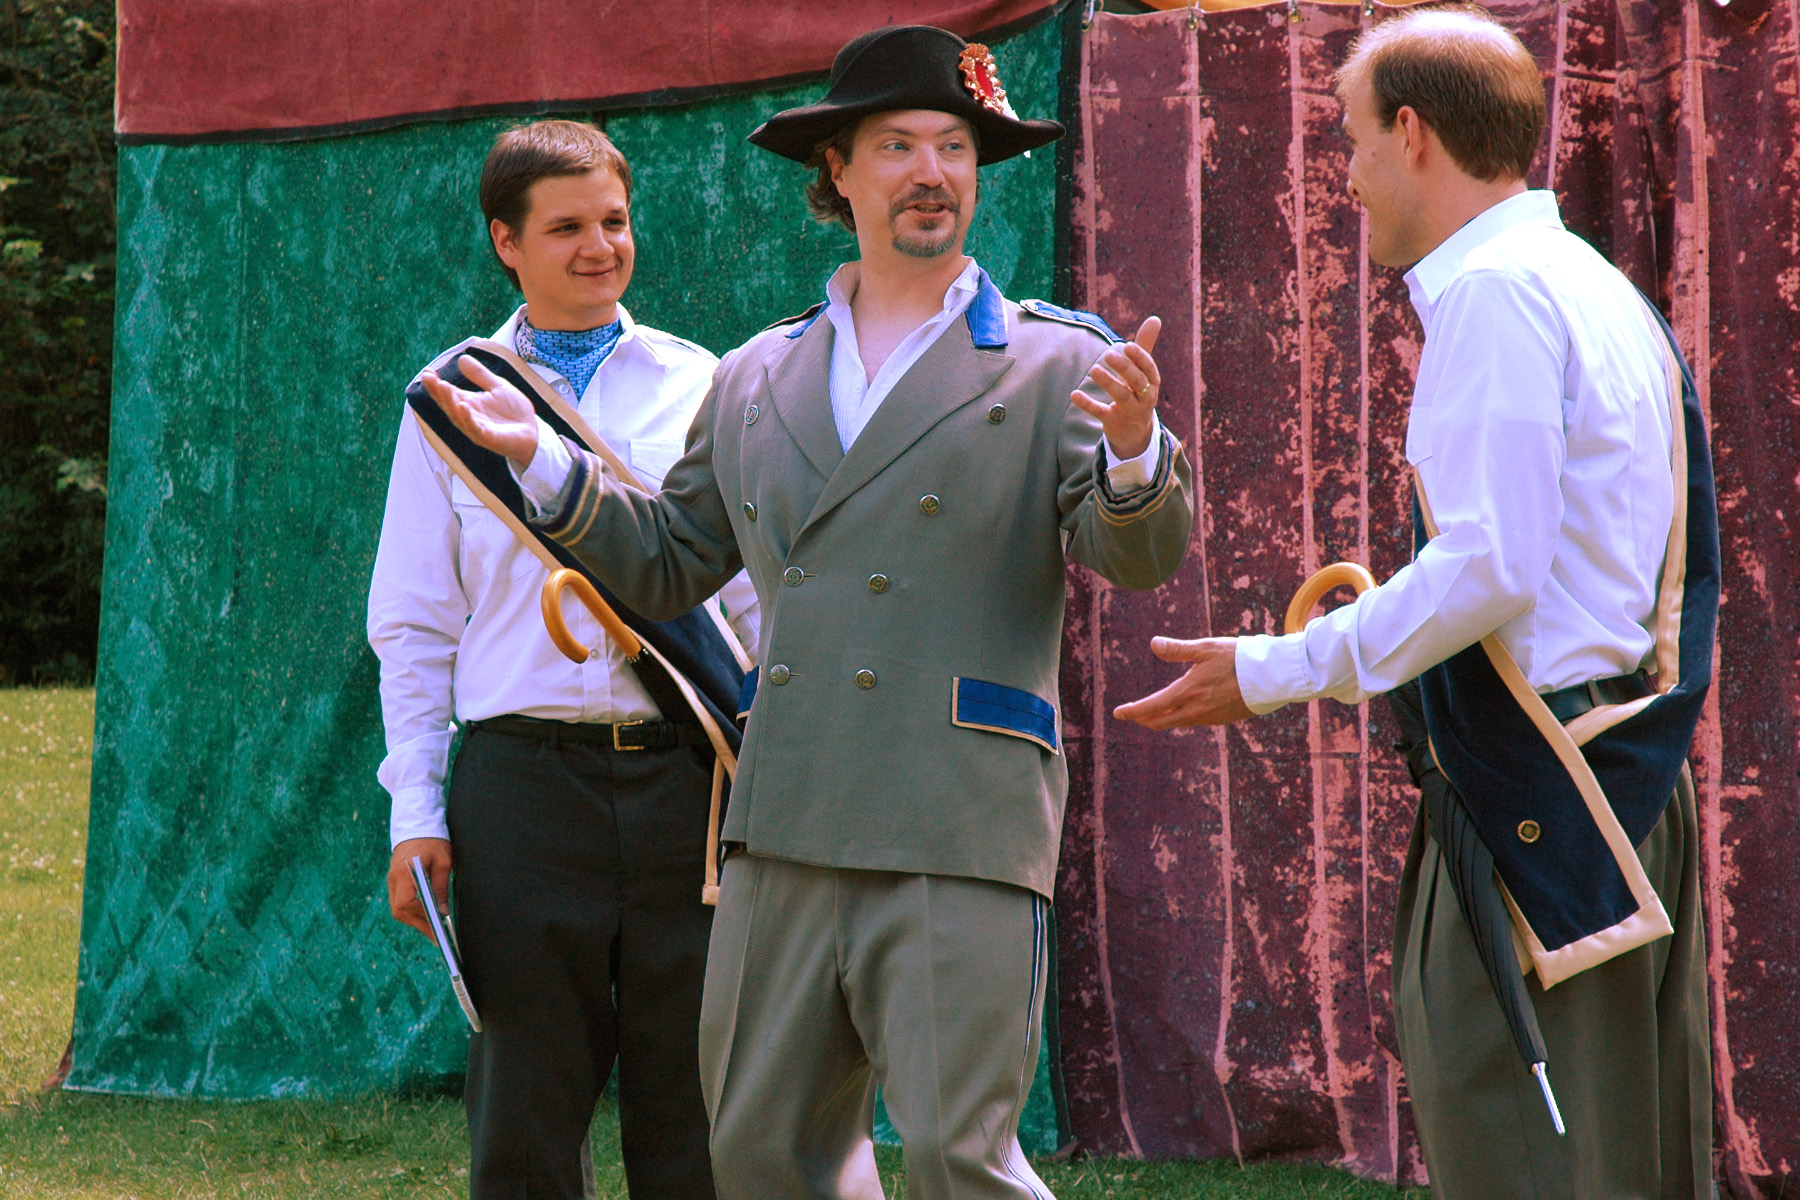 Patrick Bonck, Ray Irvin, and Dan Somerfield in All's Well That Ends Well - 2004